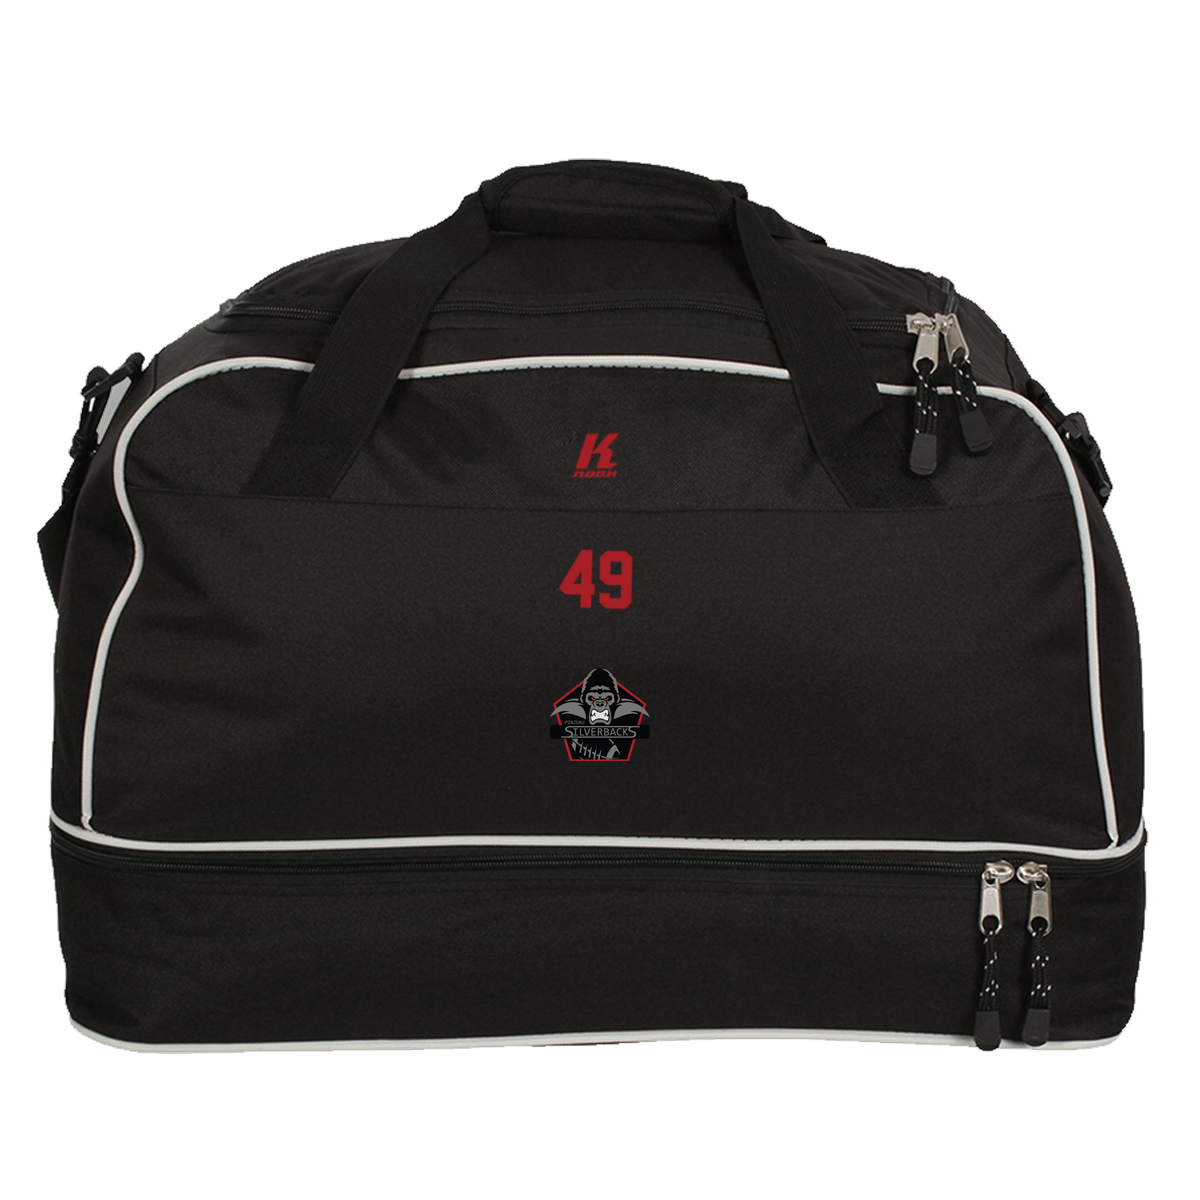 Silverbacks Players CT Bag with Playernumber or Initials